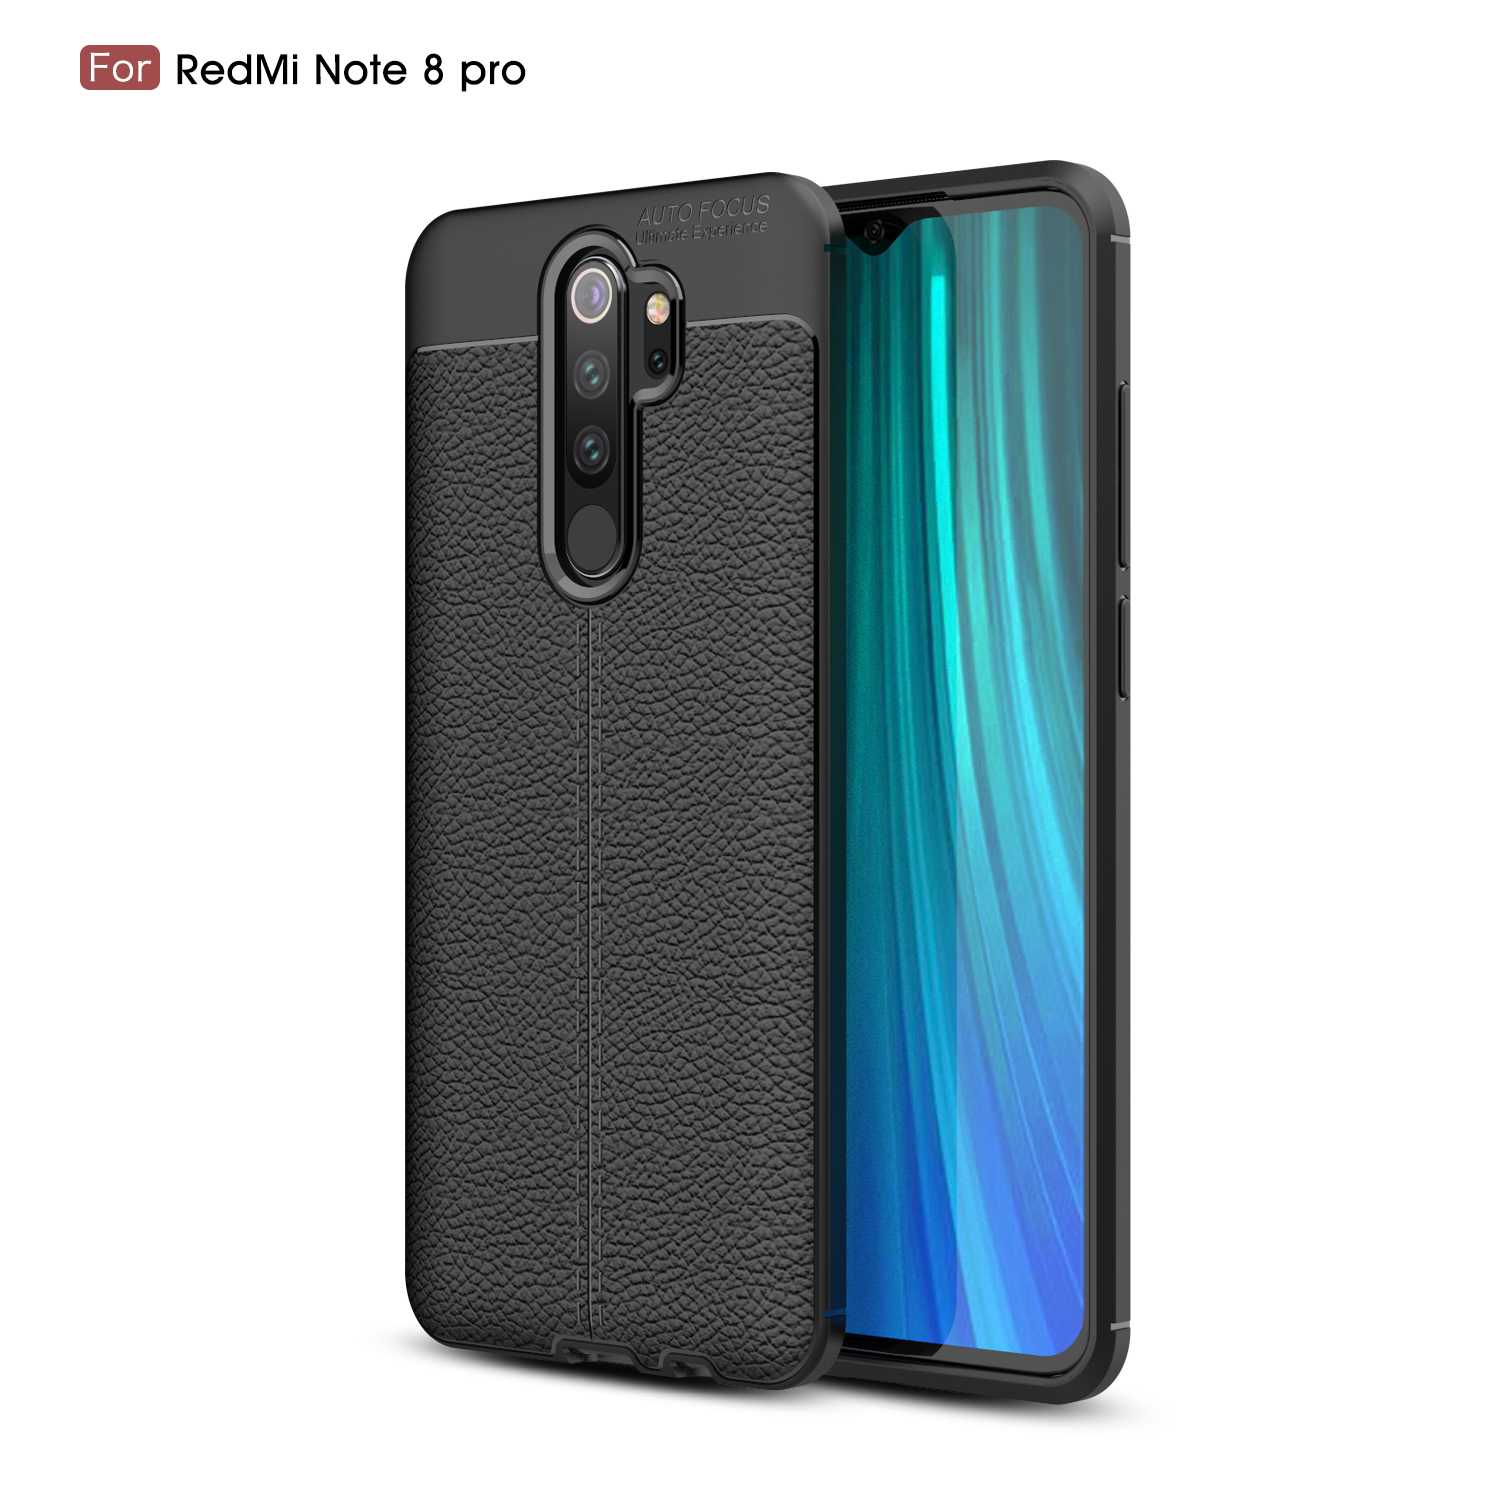 Bakeey-Xiaomi-Redmi-Note-8-Pro-Luxury-Litchi-Pattern-Shockproof-PU-Leather-Protective-Case-1588375-12